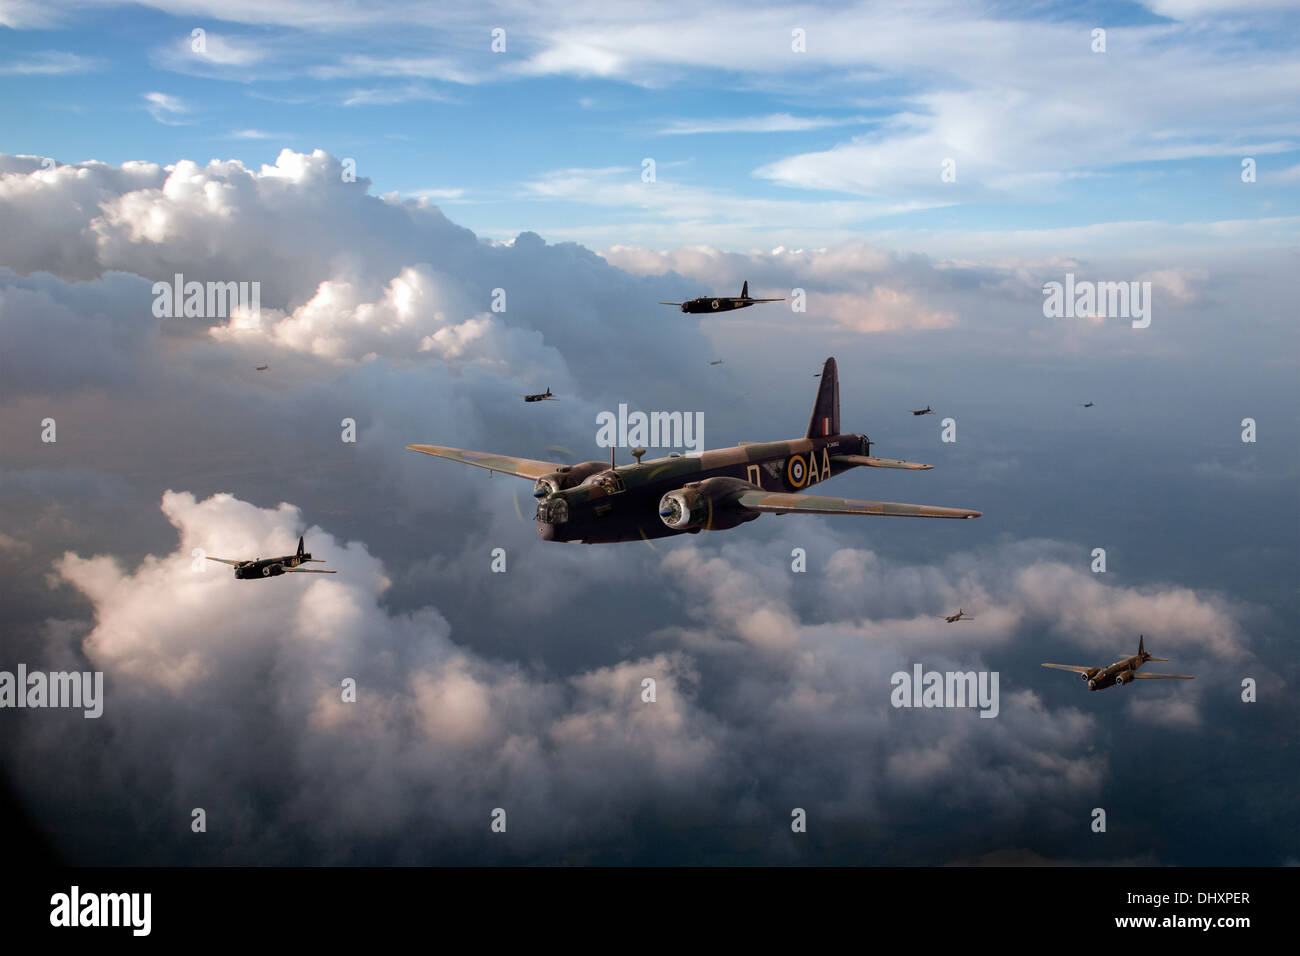 Vickers Wellingtons B Mark III bombers of No 75 (NZ) Squadron RAF. The lead aircraft is X3667. Stock Photo